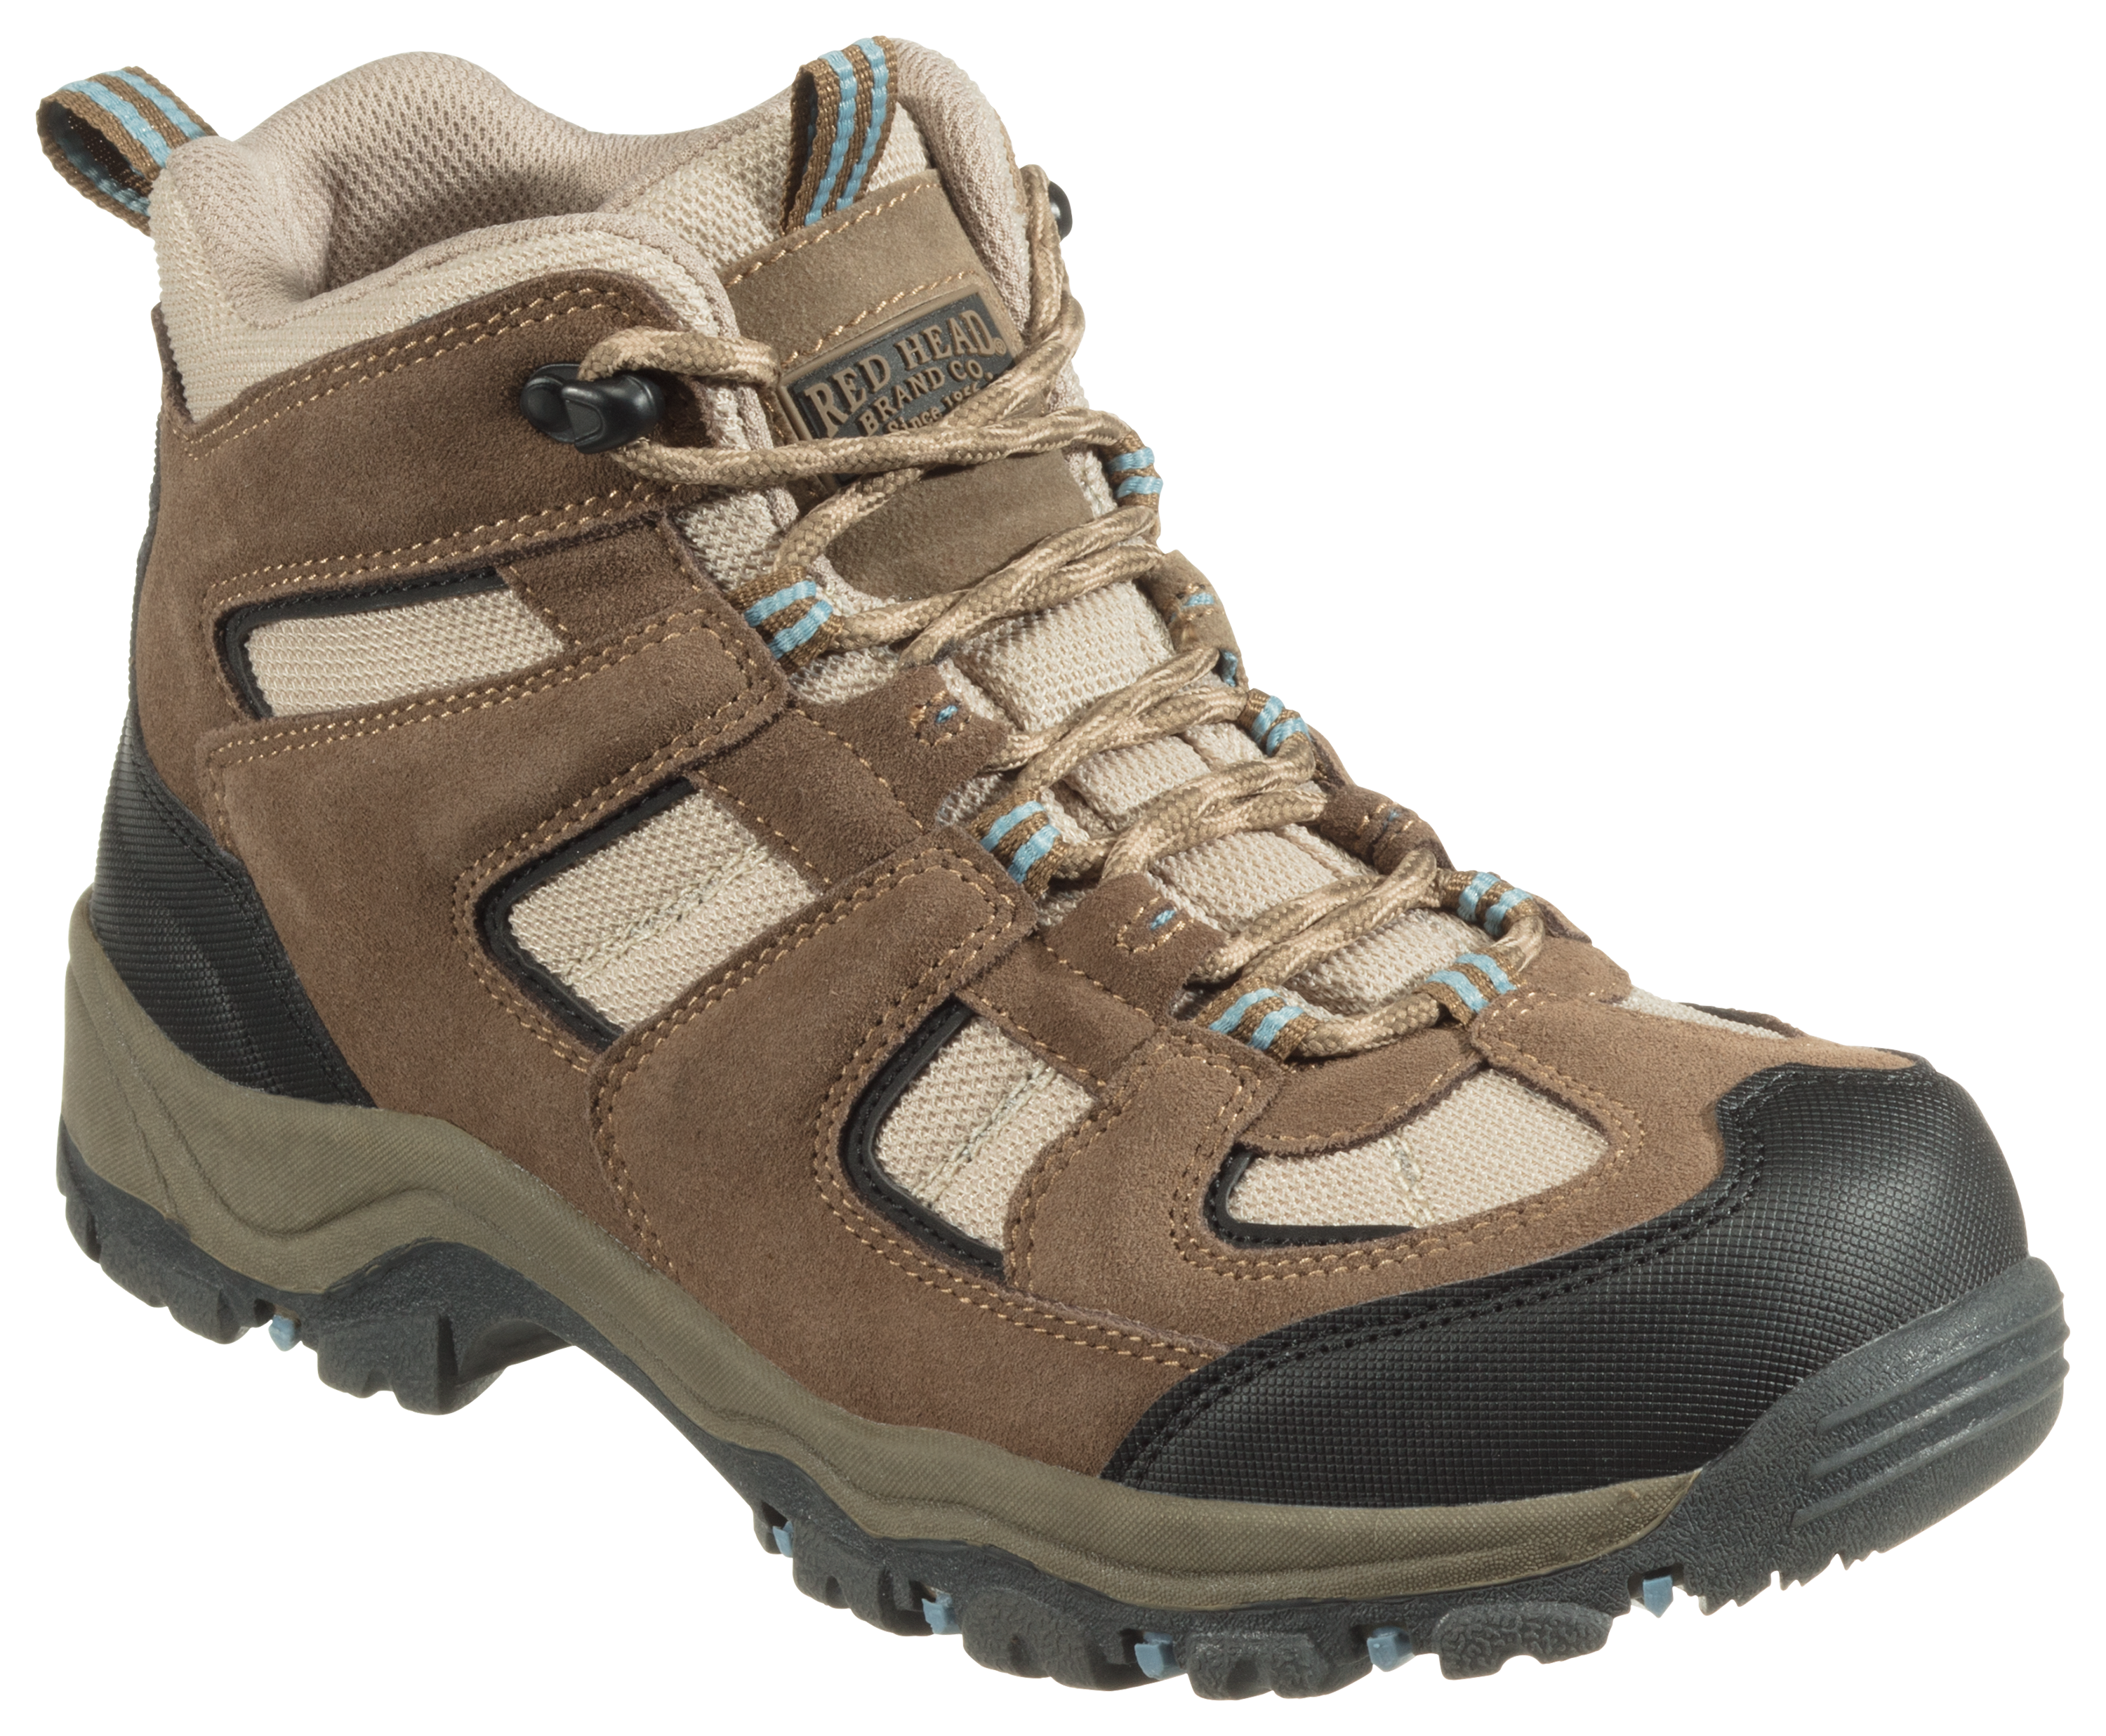 RedHead Skyline Hiking Boots for Ladies | Bass Pro Shops